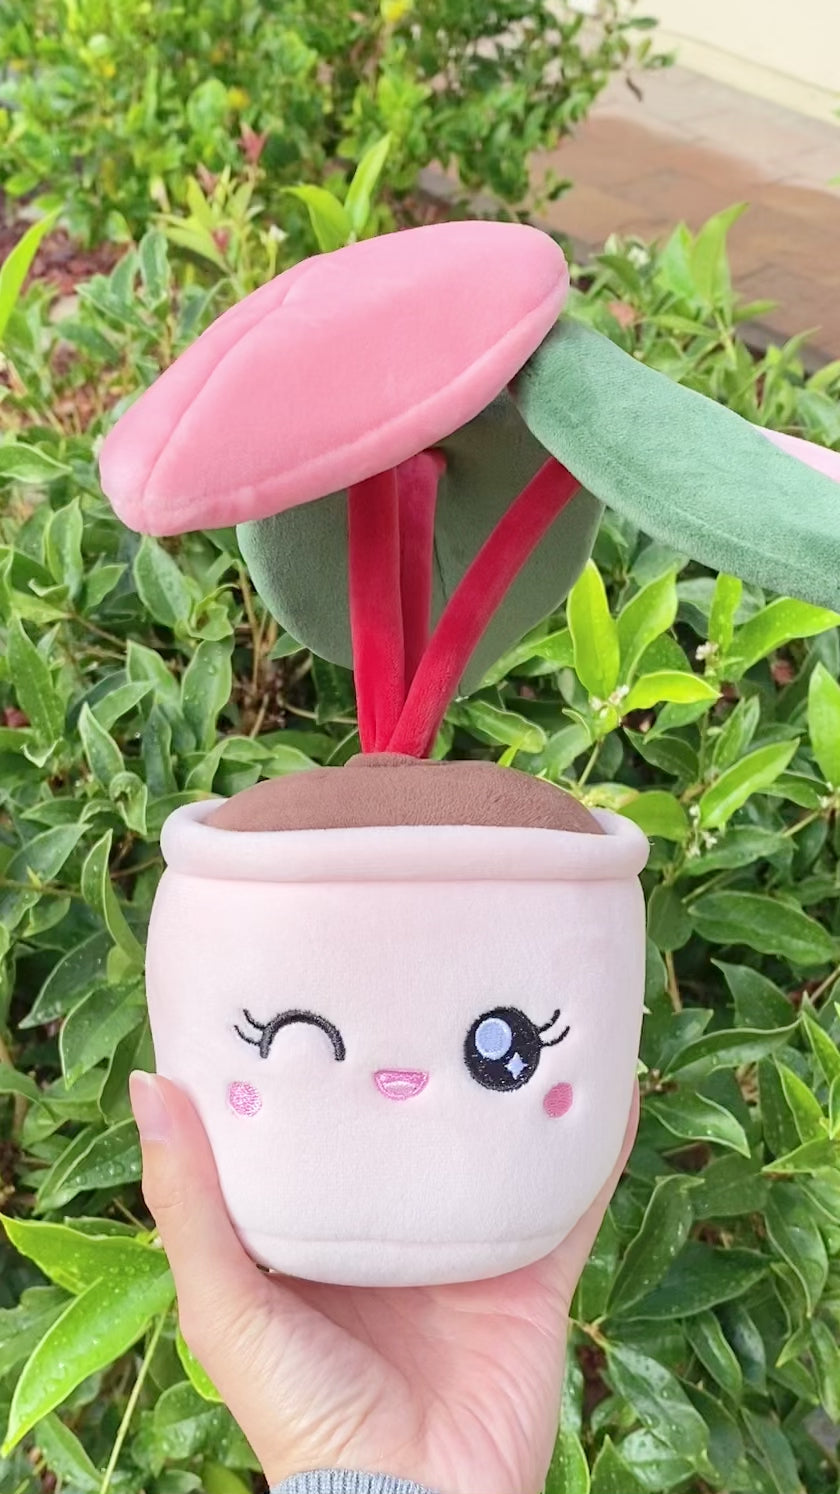 A video showcasing a woman holding a plush toy of a potted plant with a pink pot. The plant is a pink princess philodendron with three leaves. One leaf is green, another leaf is pink, and the third leaf has a split color pattern with the left side green and the right side pink. The plant's dark red stems are visible as the woman rotates the toy for the camera, providing different angles to appreciate the details of the plant.